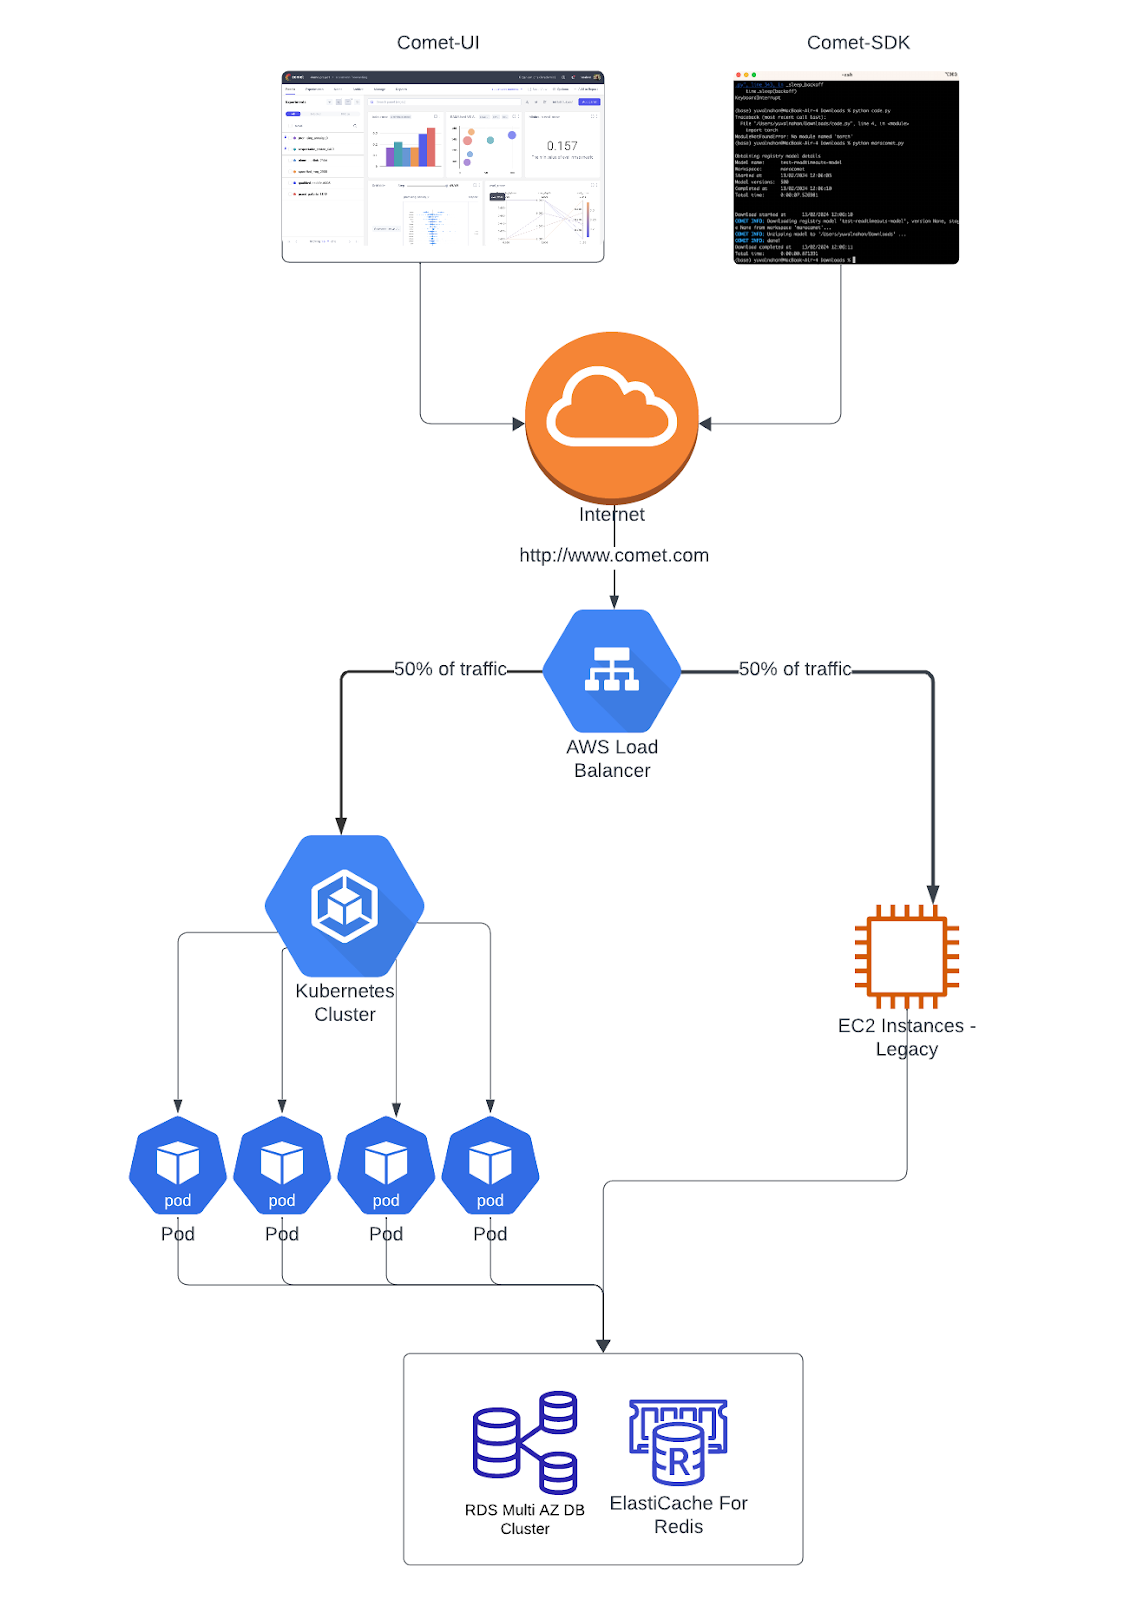 Flow diagram showing the system Comet used to achieve zero downtime in their SaaS environment